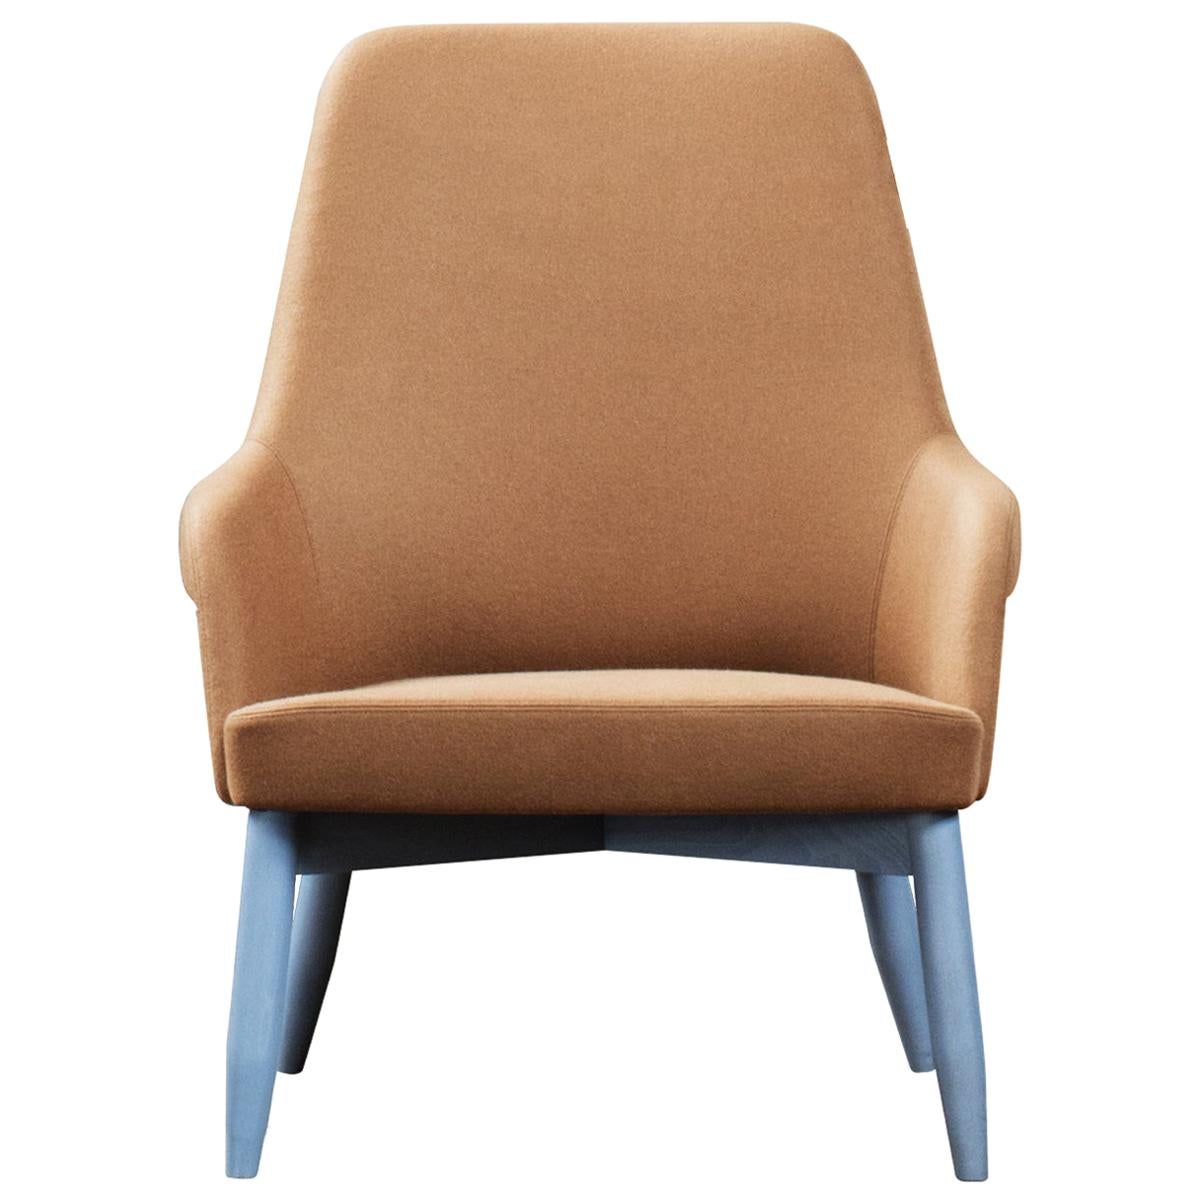 Spy 659 Brown and Blue Armchair by Emilio Nanni